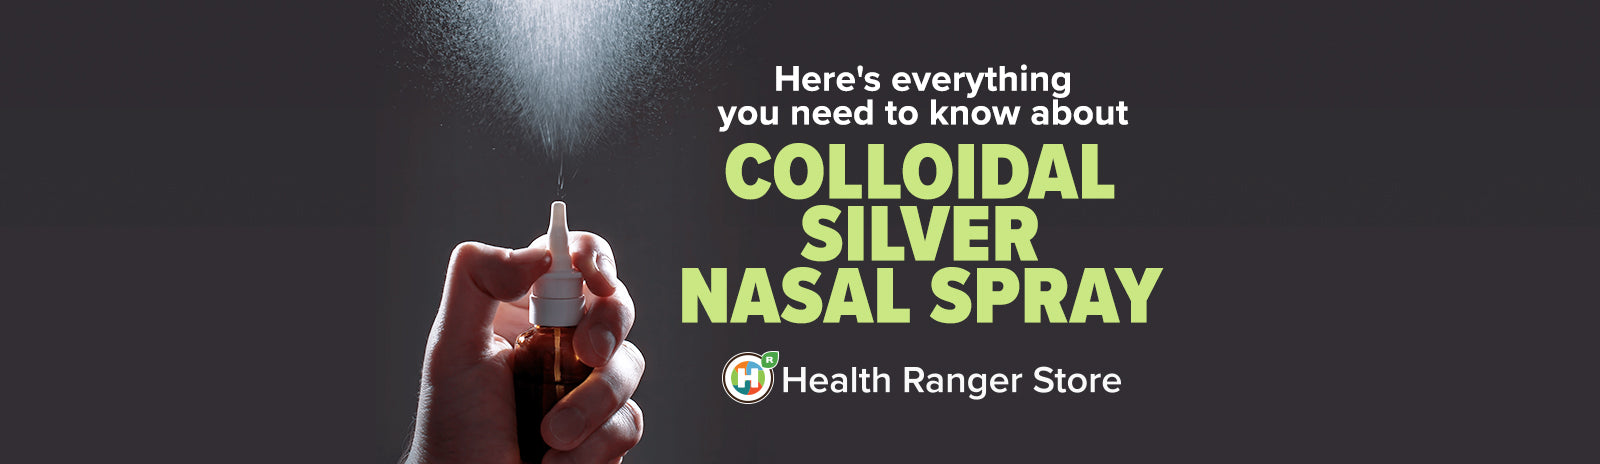 Everything you need to know about colloidal silver nasal spray